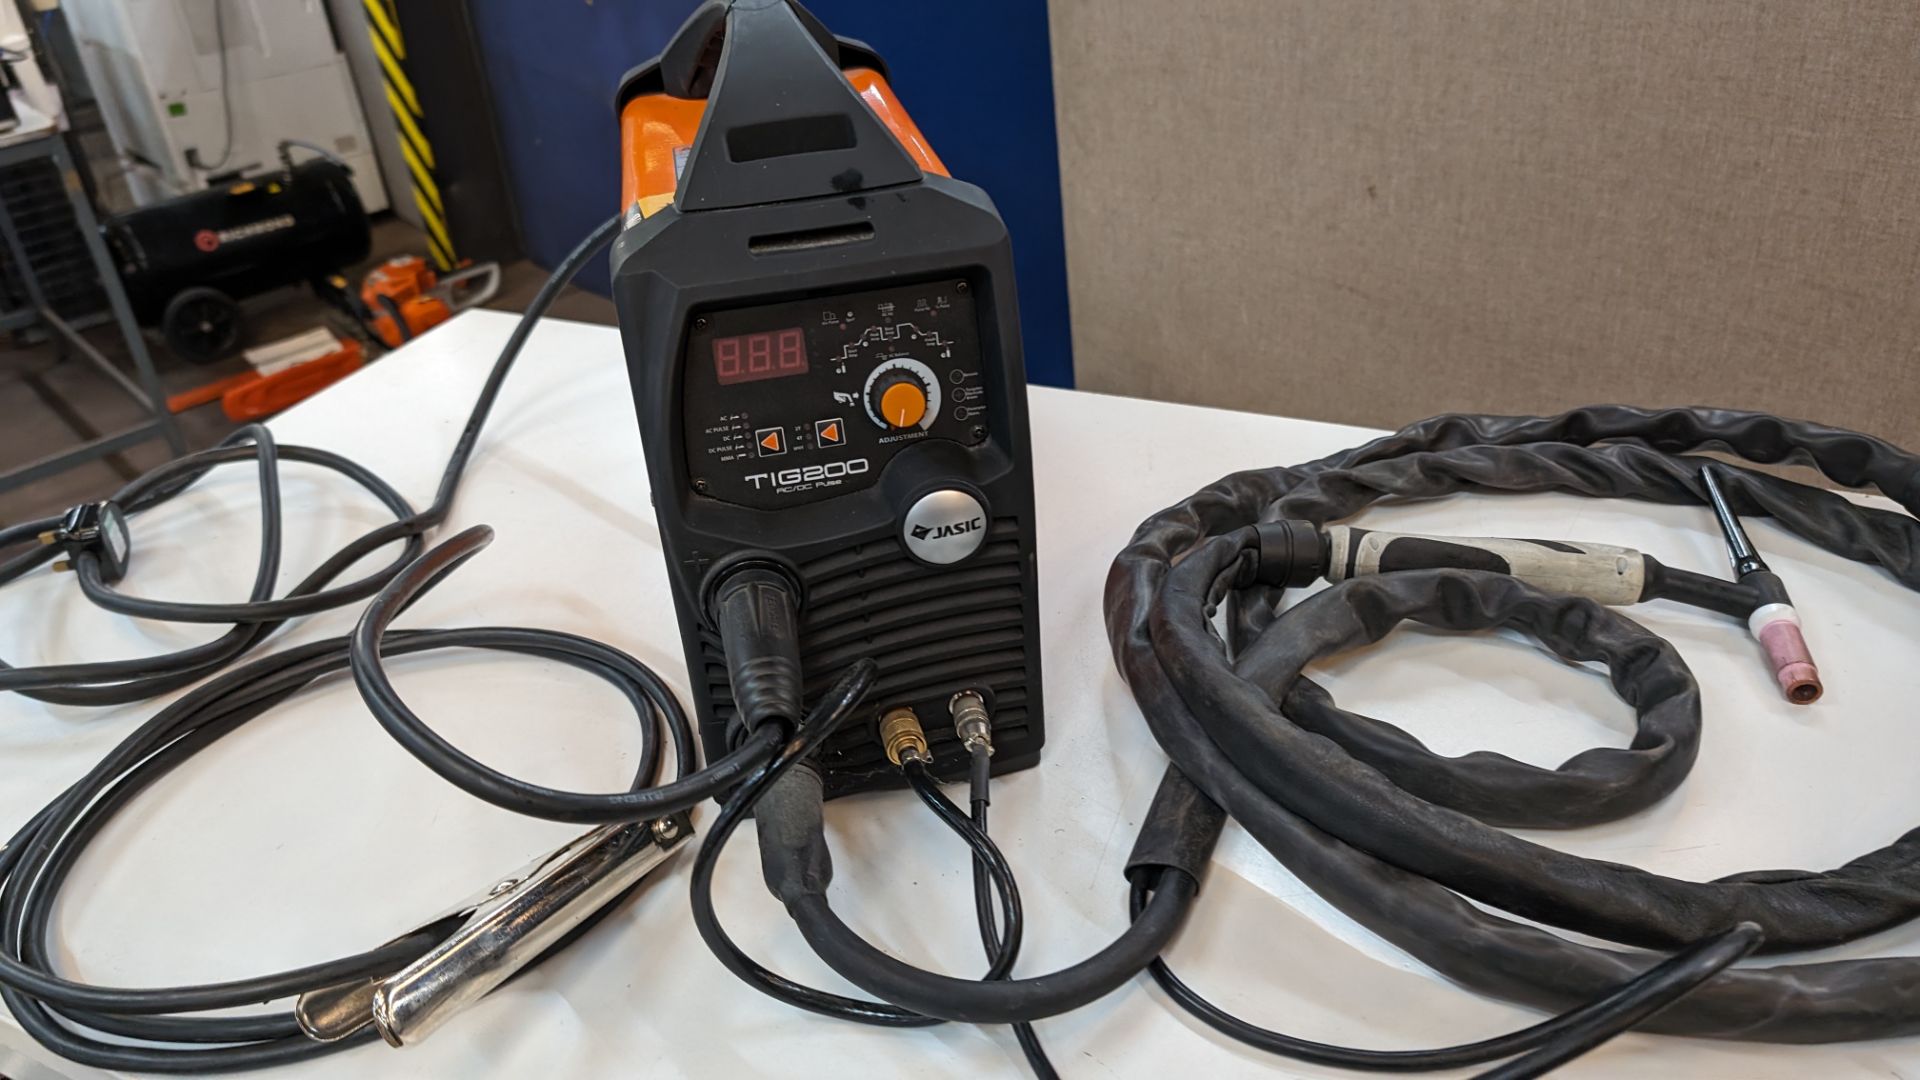 Jasic Pro tig 200 AC/DC pulse welder, including welding mask, box of consumables & other items as pi - Image 6 of 23